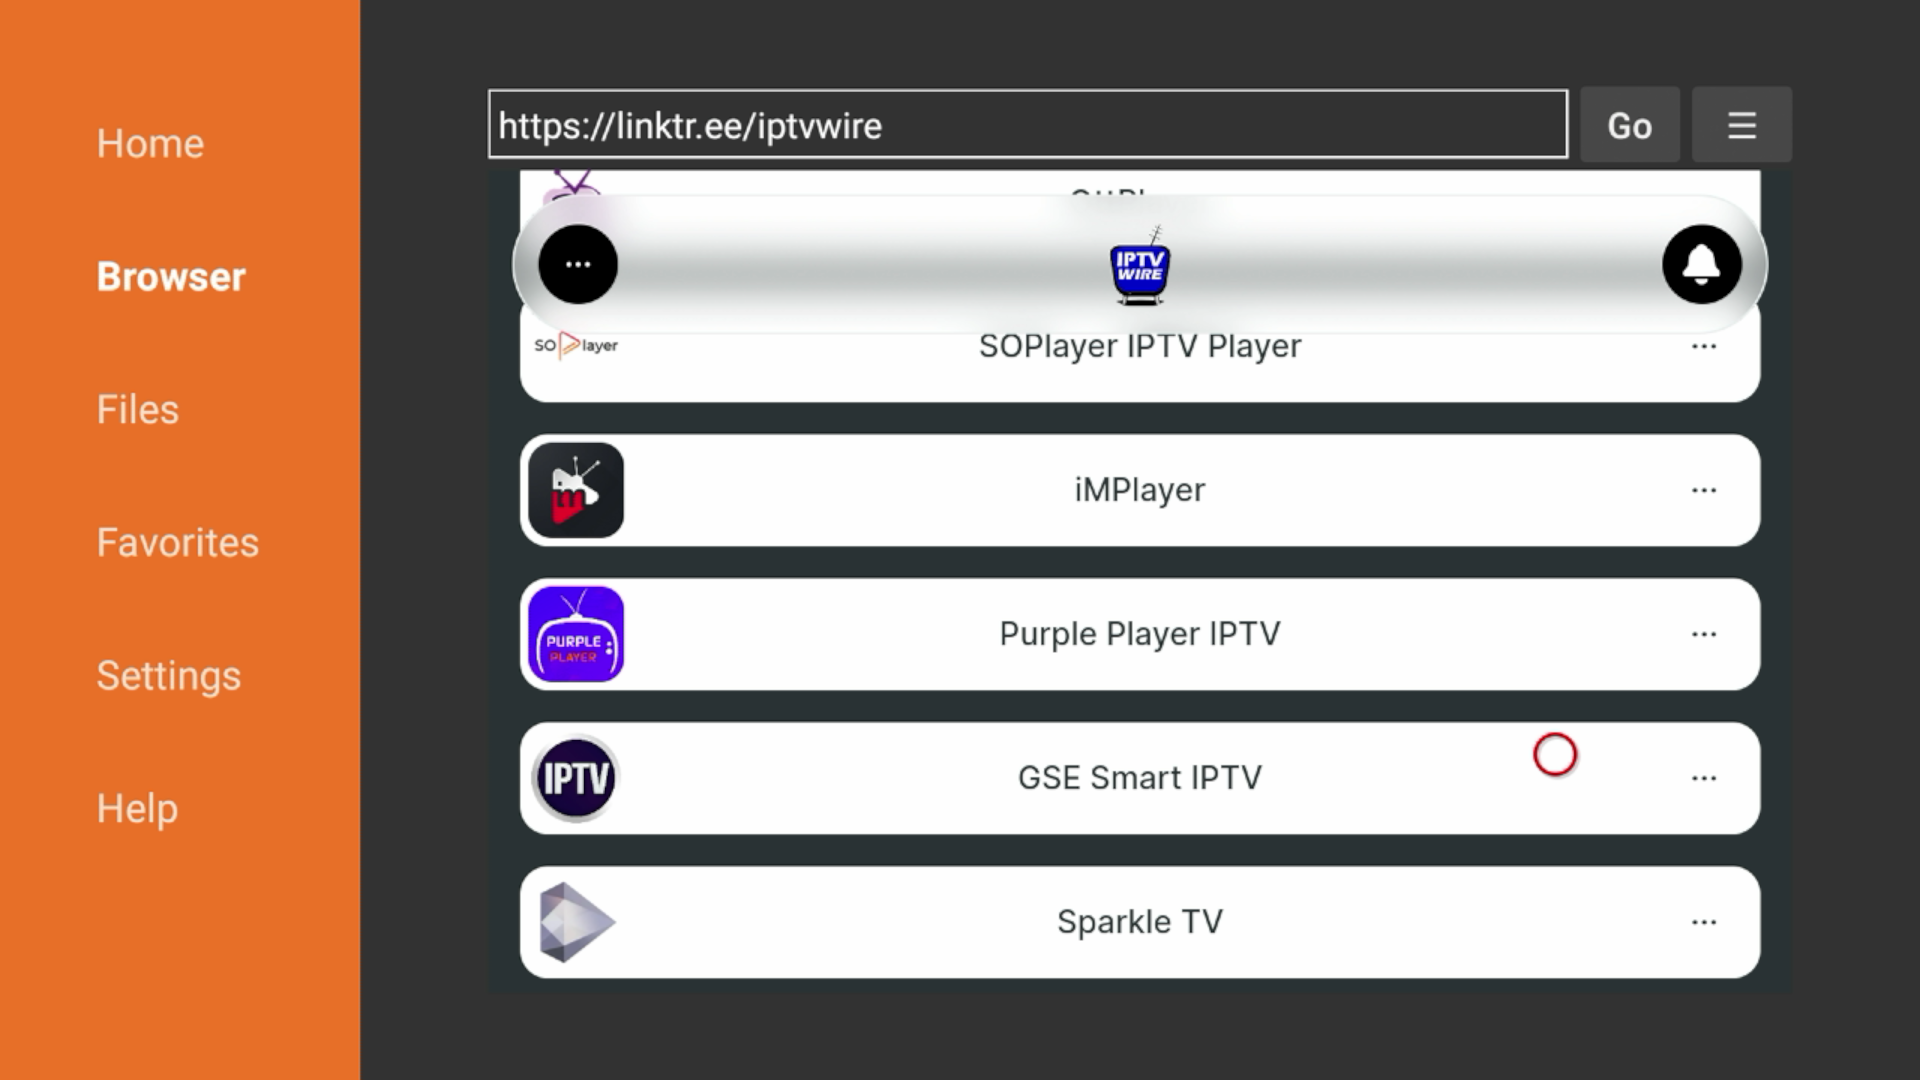 Scroll down and find GSE Smart IPTV. Click to start the installation.